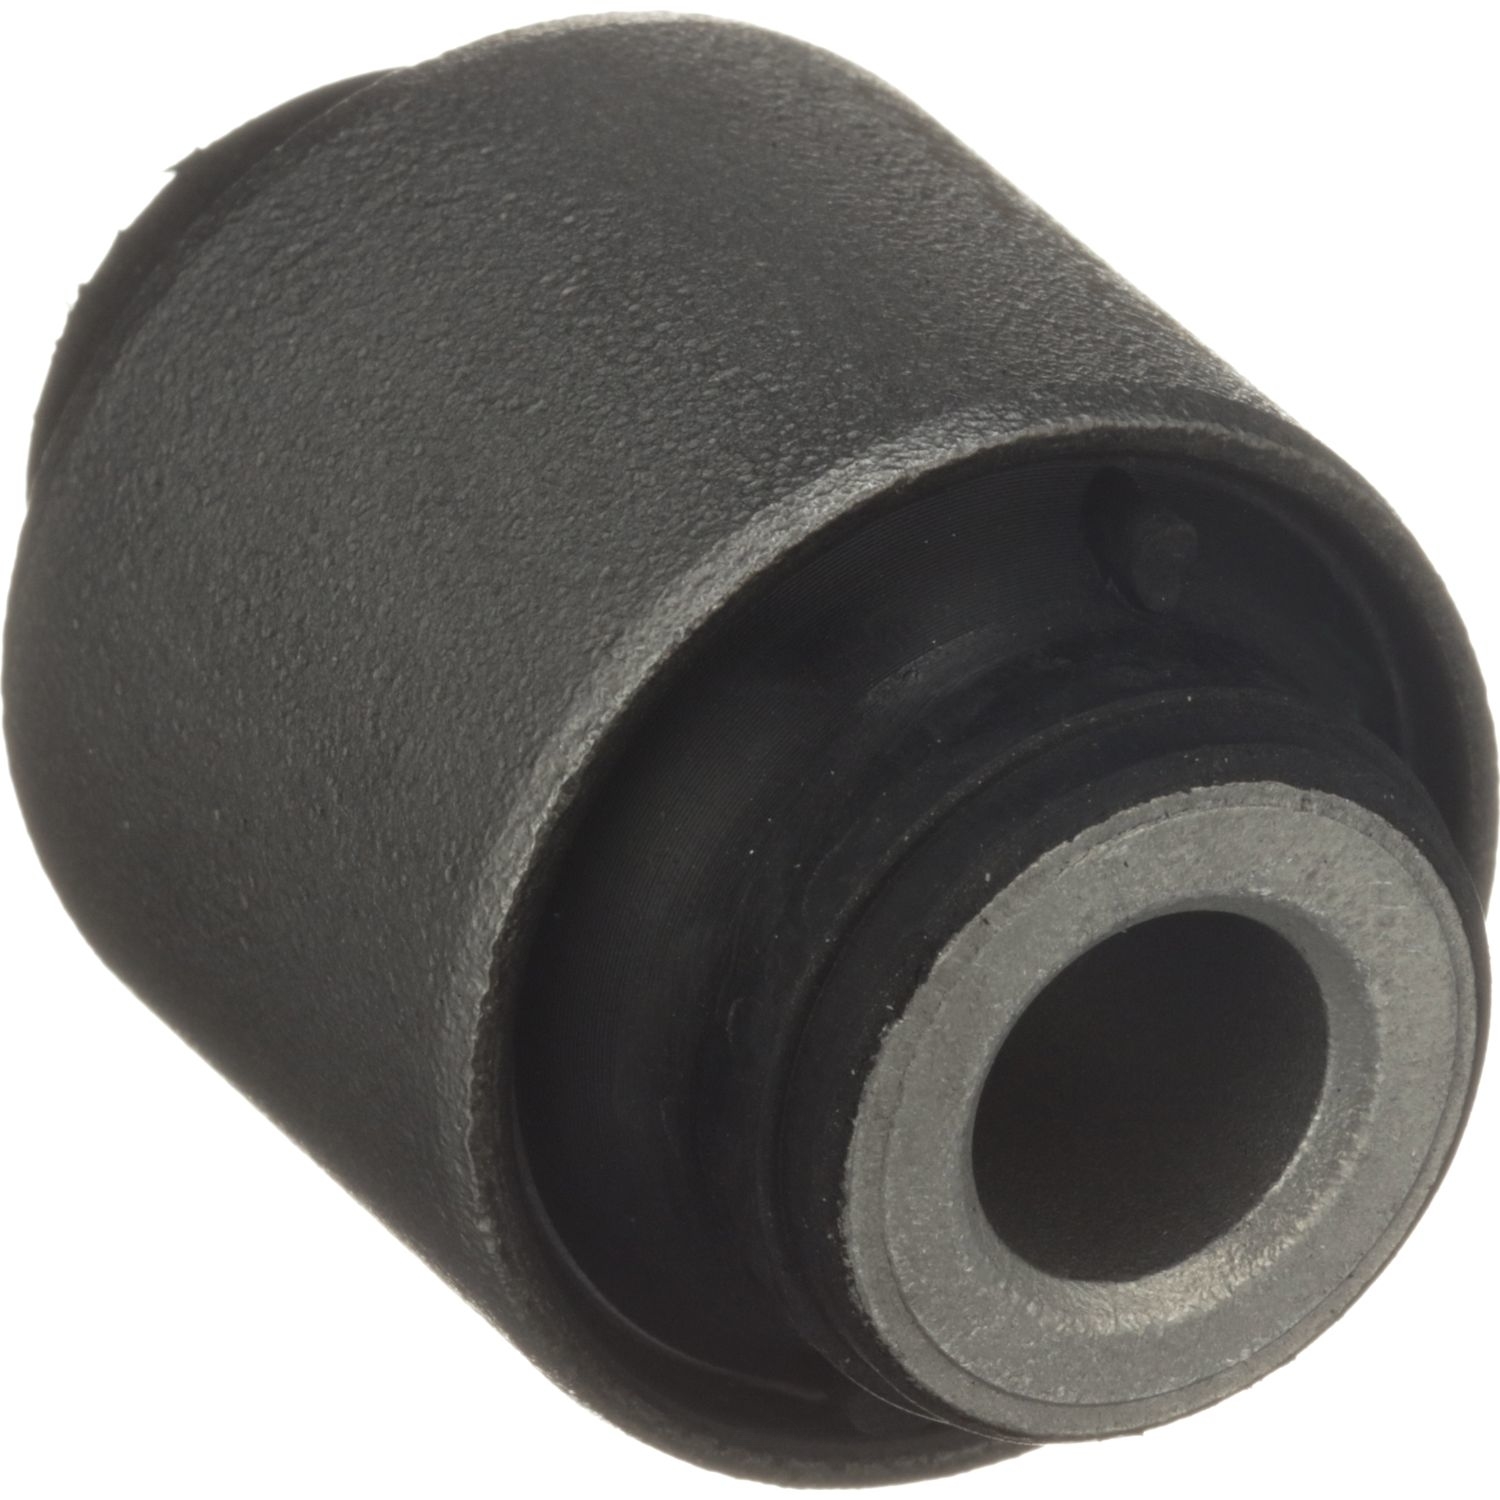 DELPHI - Suspension Control Arm Bushing (Rear Lower At Knuckle) - DPH TD4758W